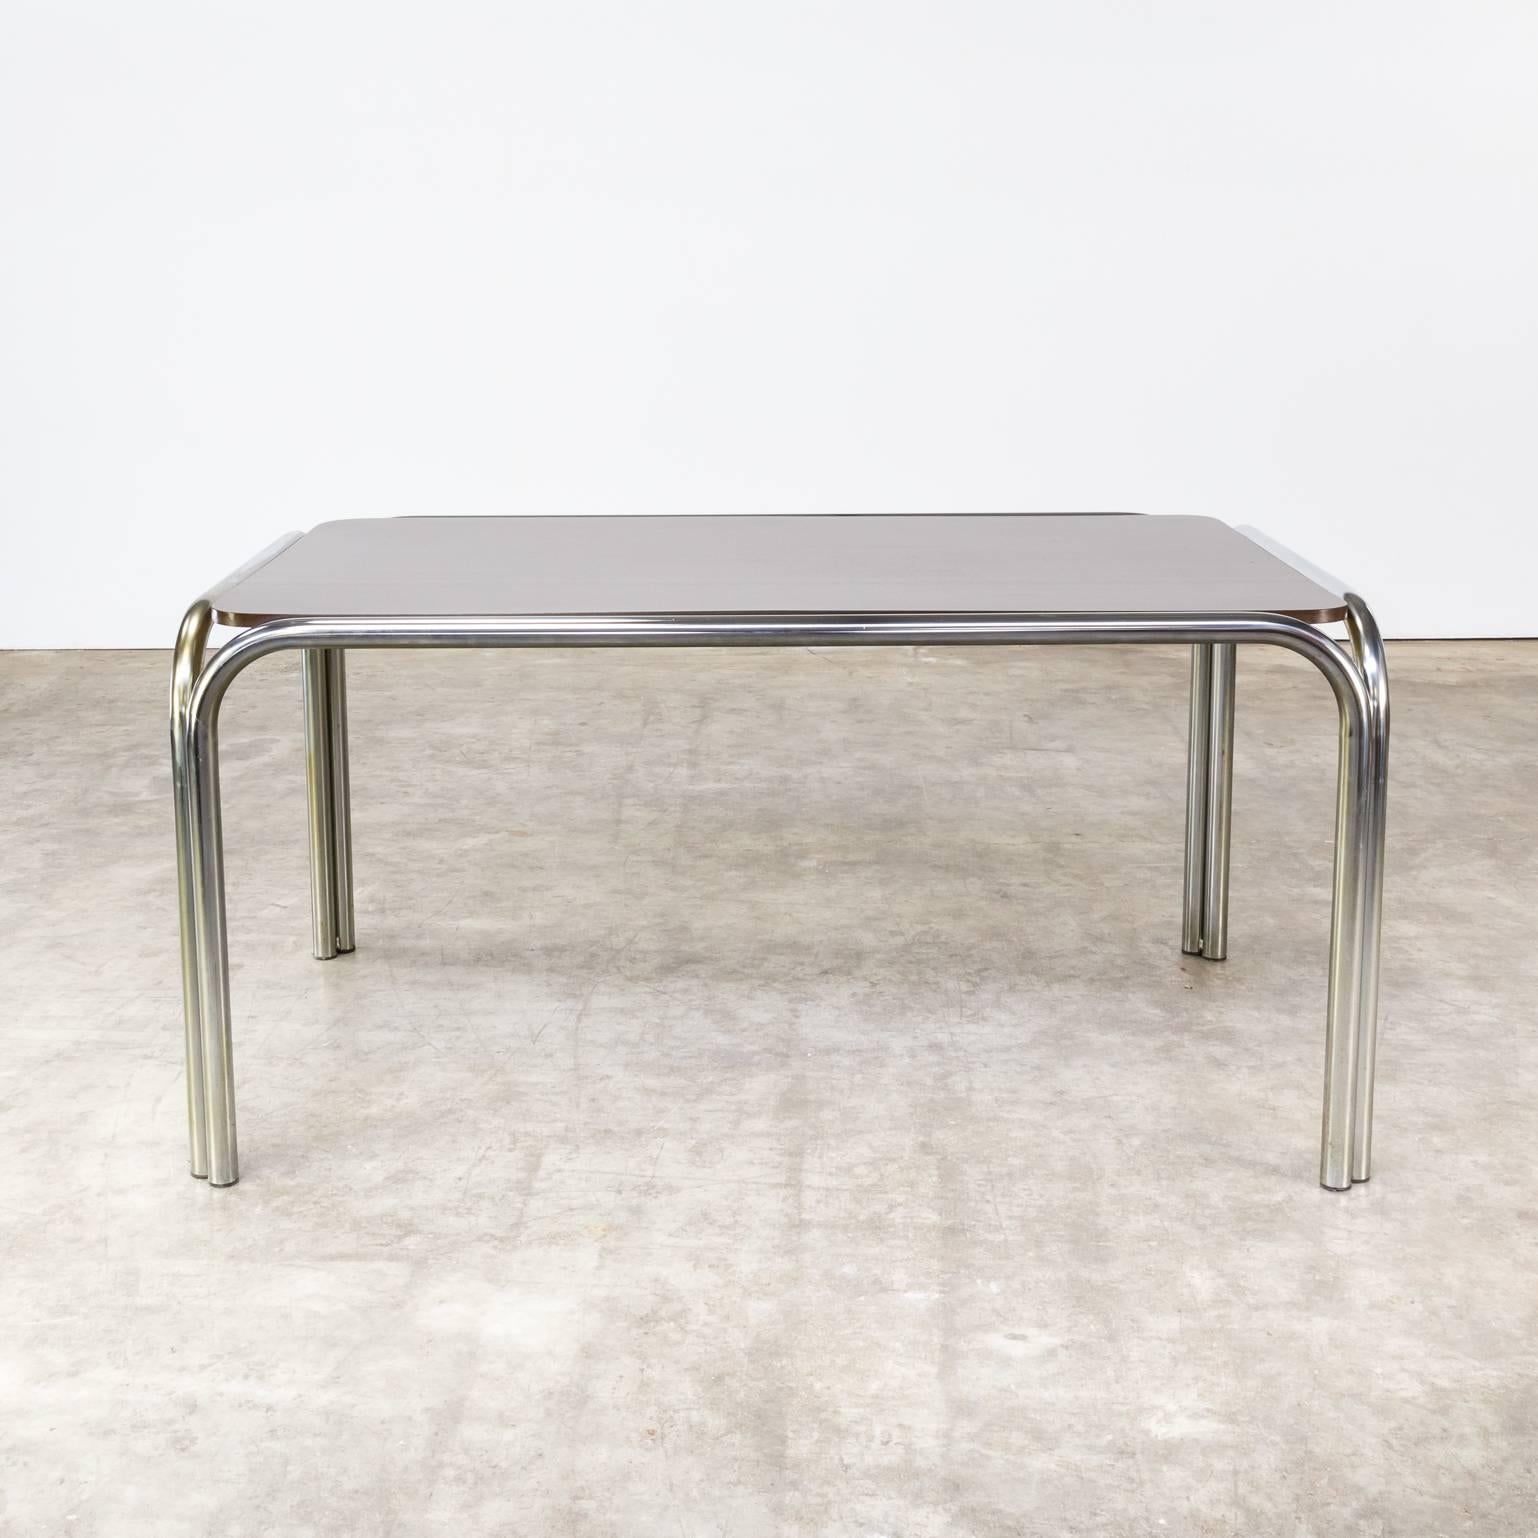 1970s tube frame design dining table. Chrome framing with beautiful patina, tabletop good, wear consistent with age and use.